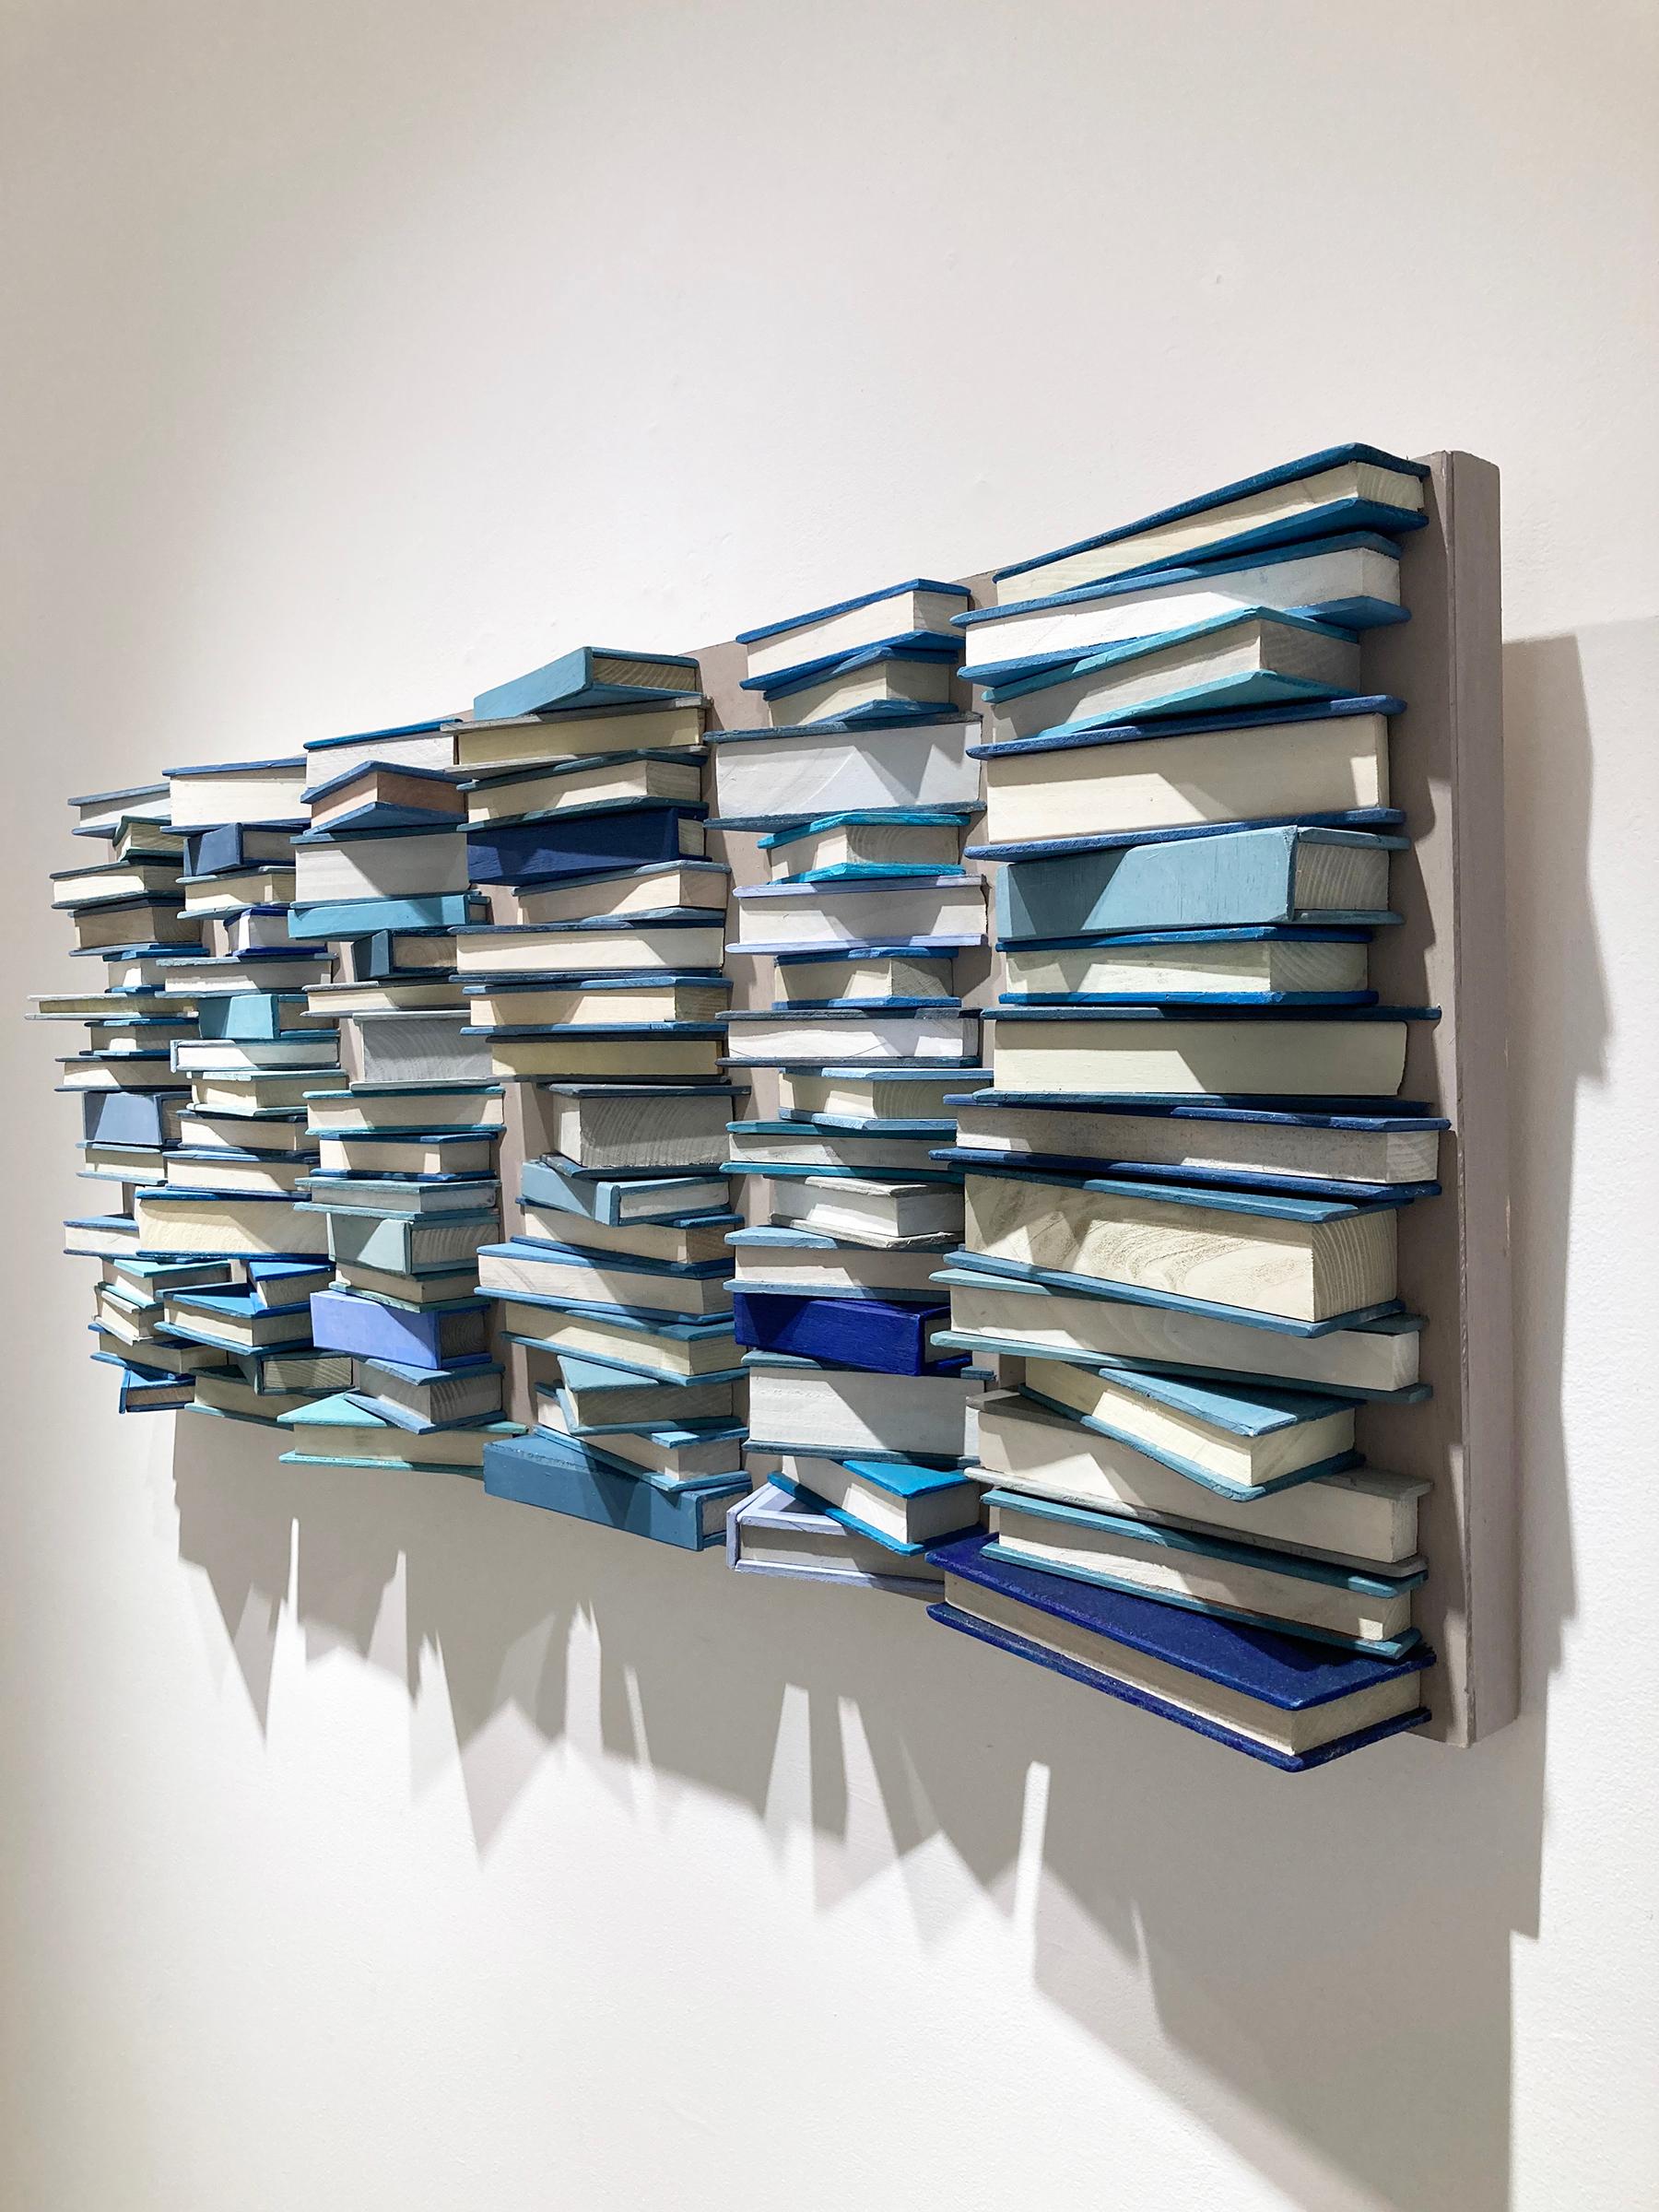 Blue Books: Abstract Geometric 3D Wood Wall Sculpture in Blue, Grey, White - Painting by Stephen Walling